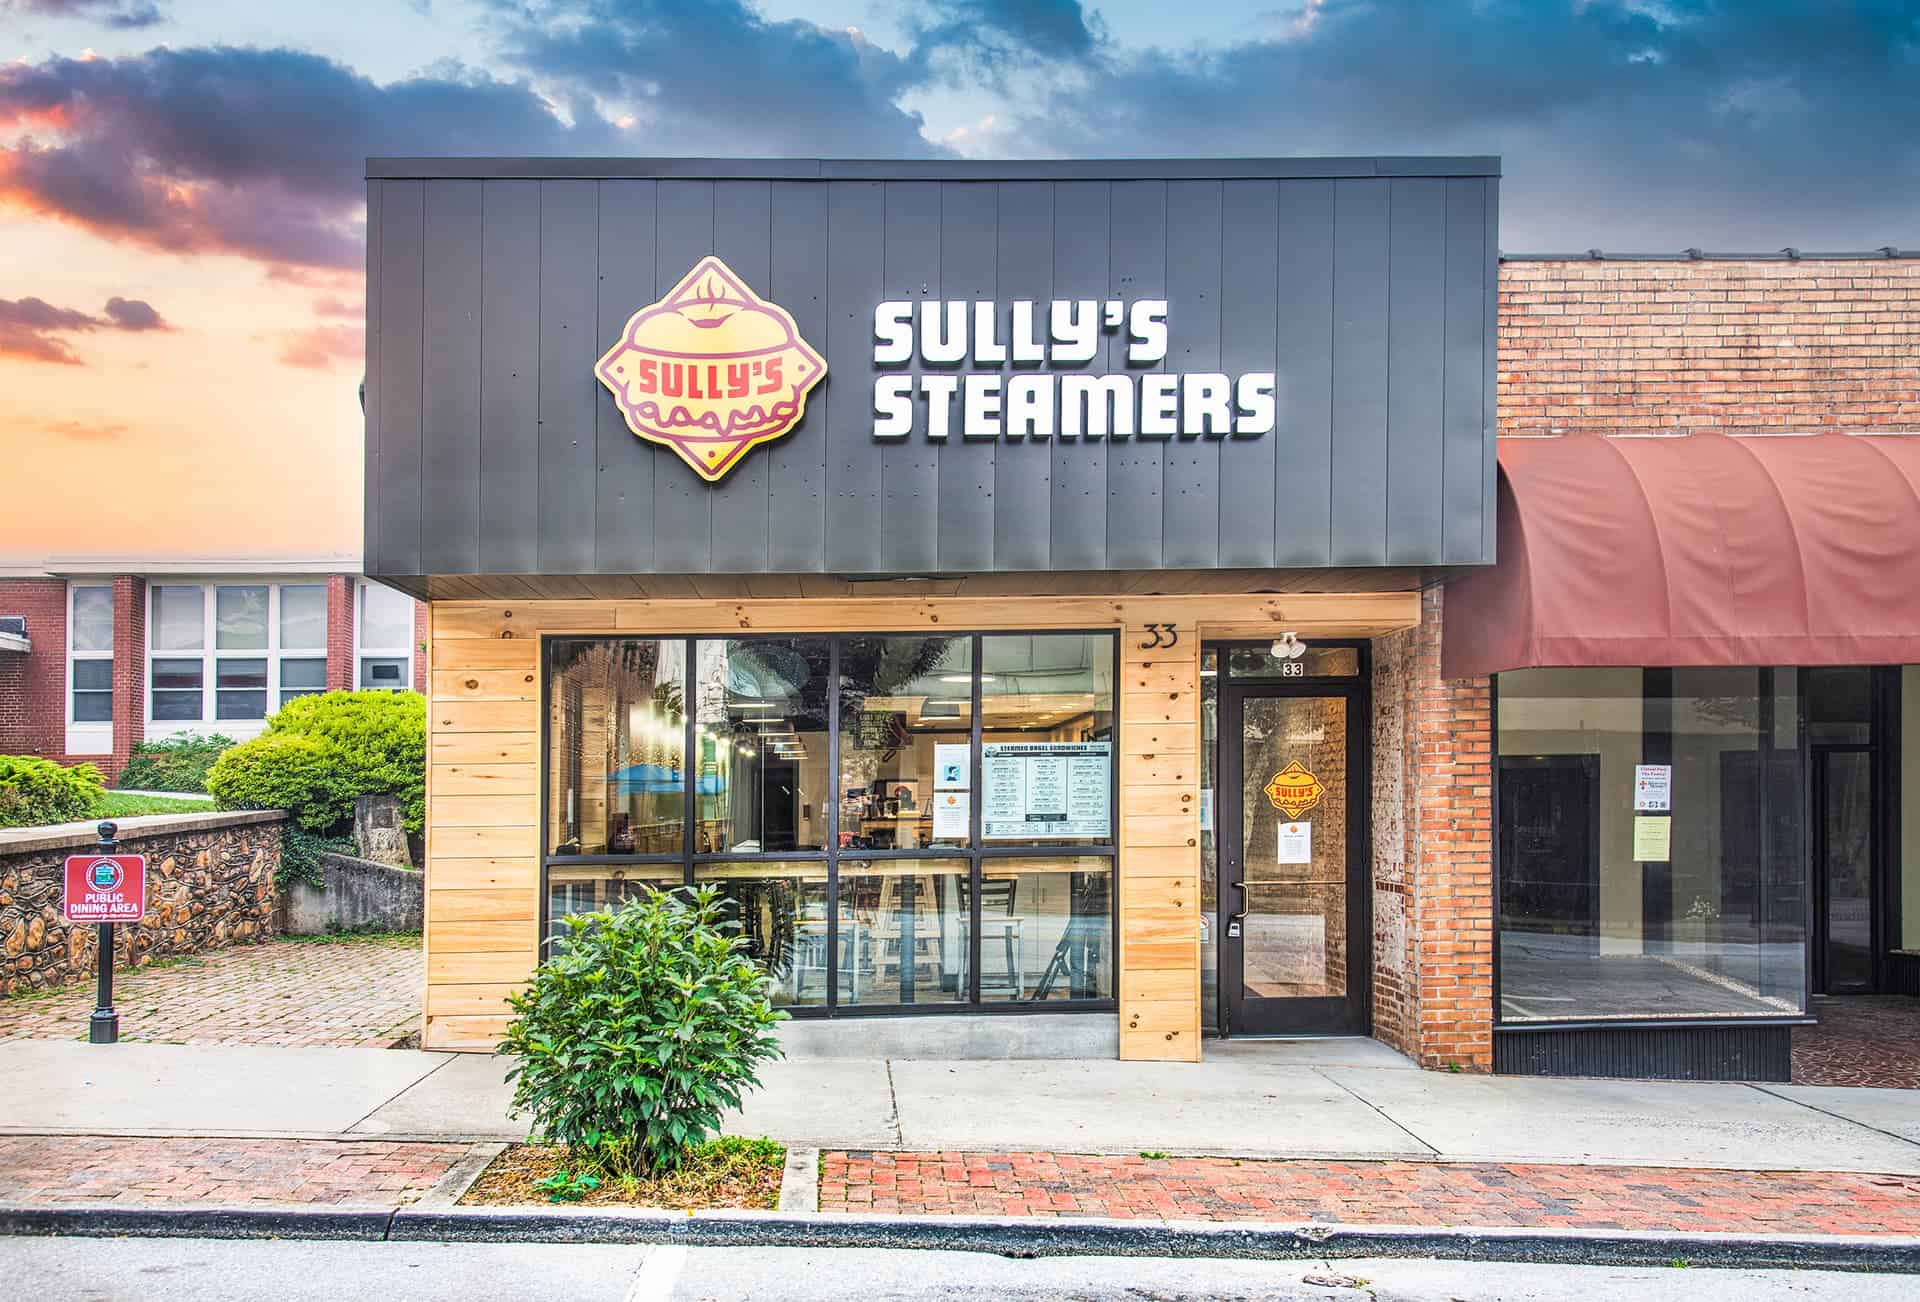 sully's steamers storefront